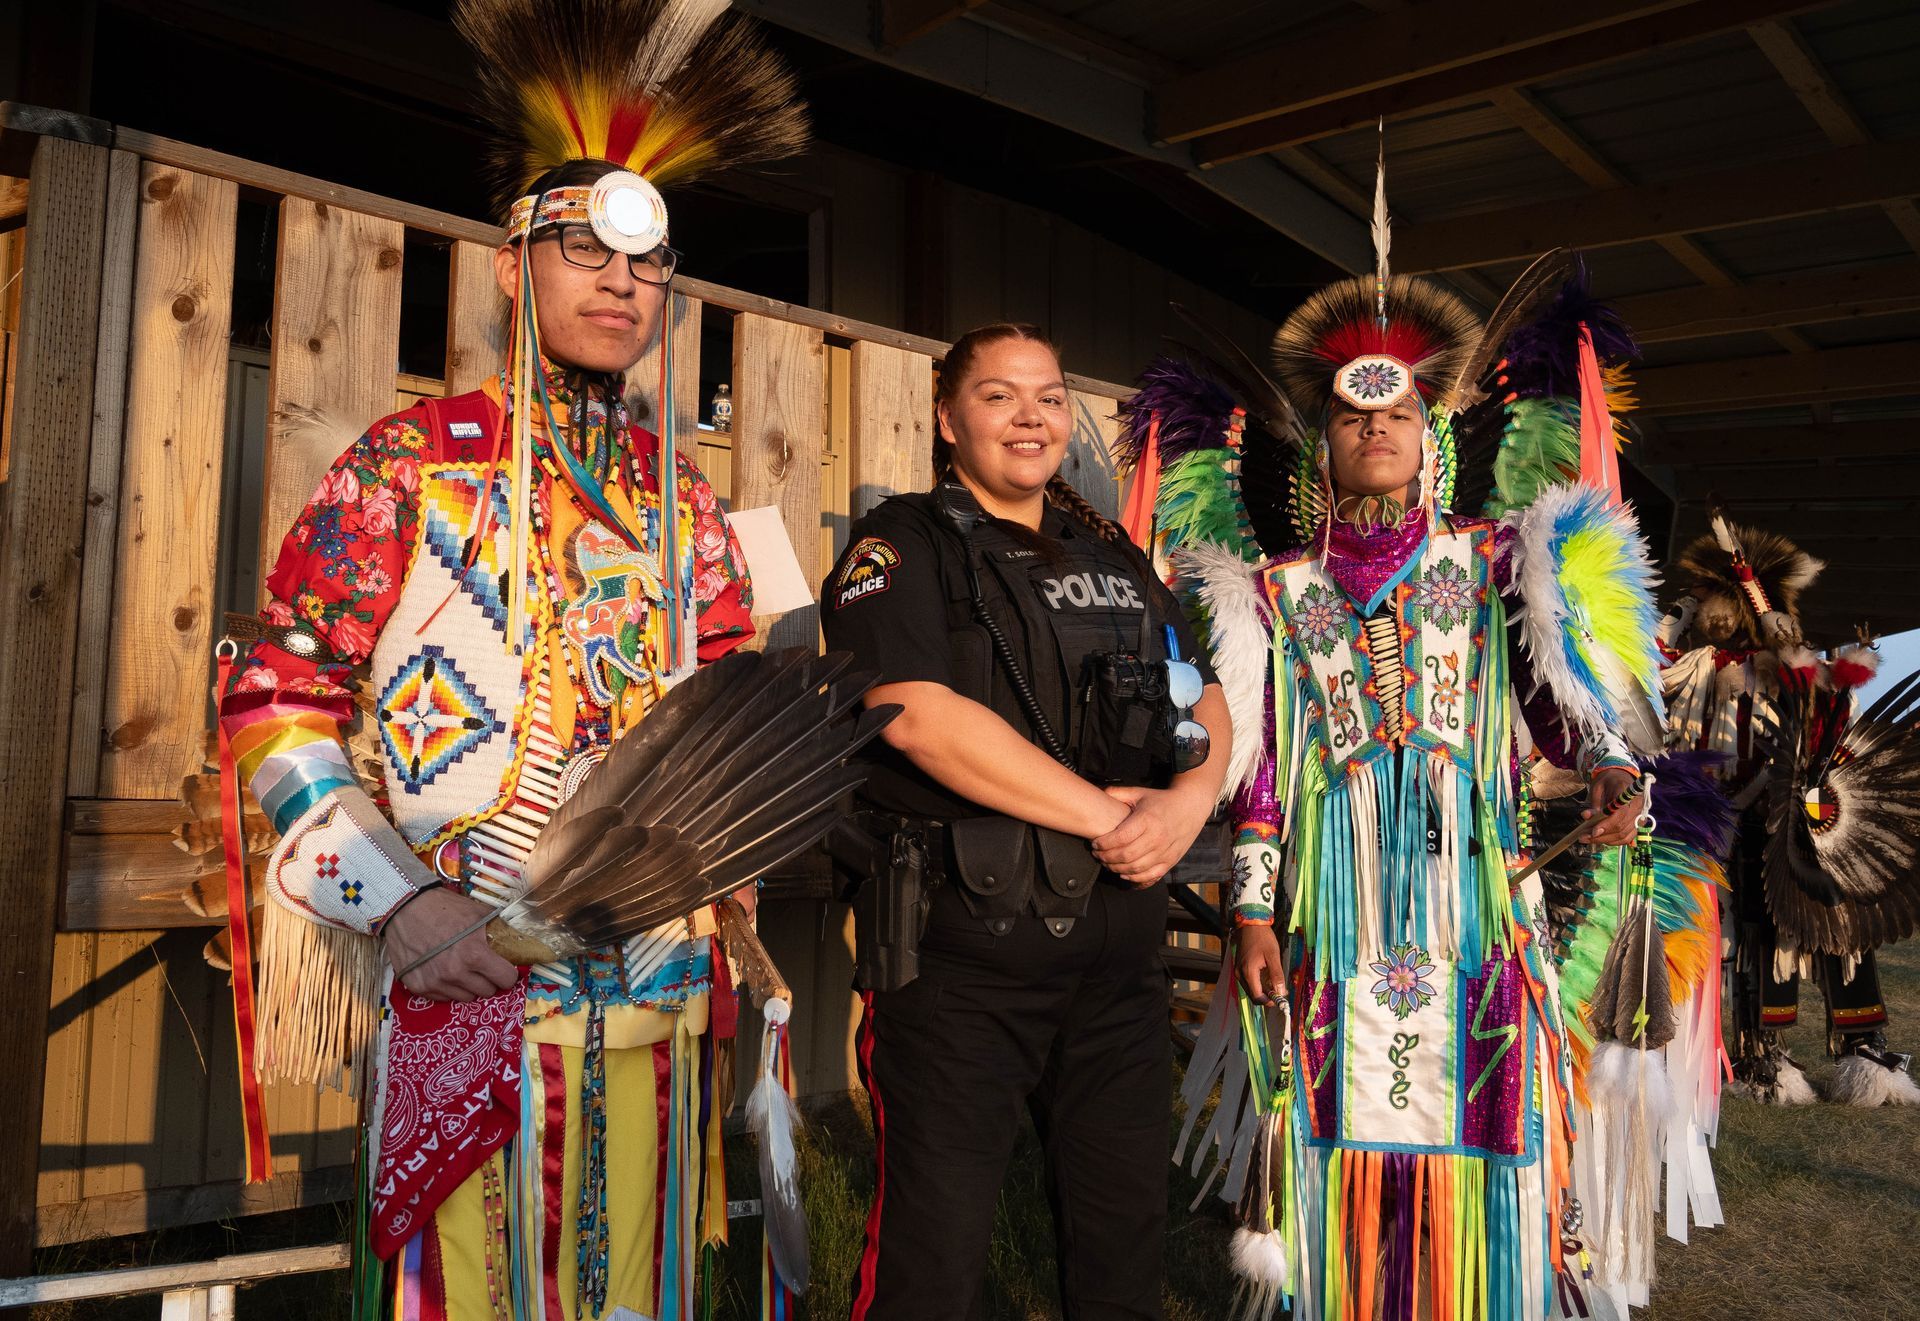 MFNPS-Manitoba First Nations Police Service ceremonial indigenous dress and officer